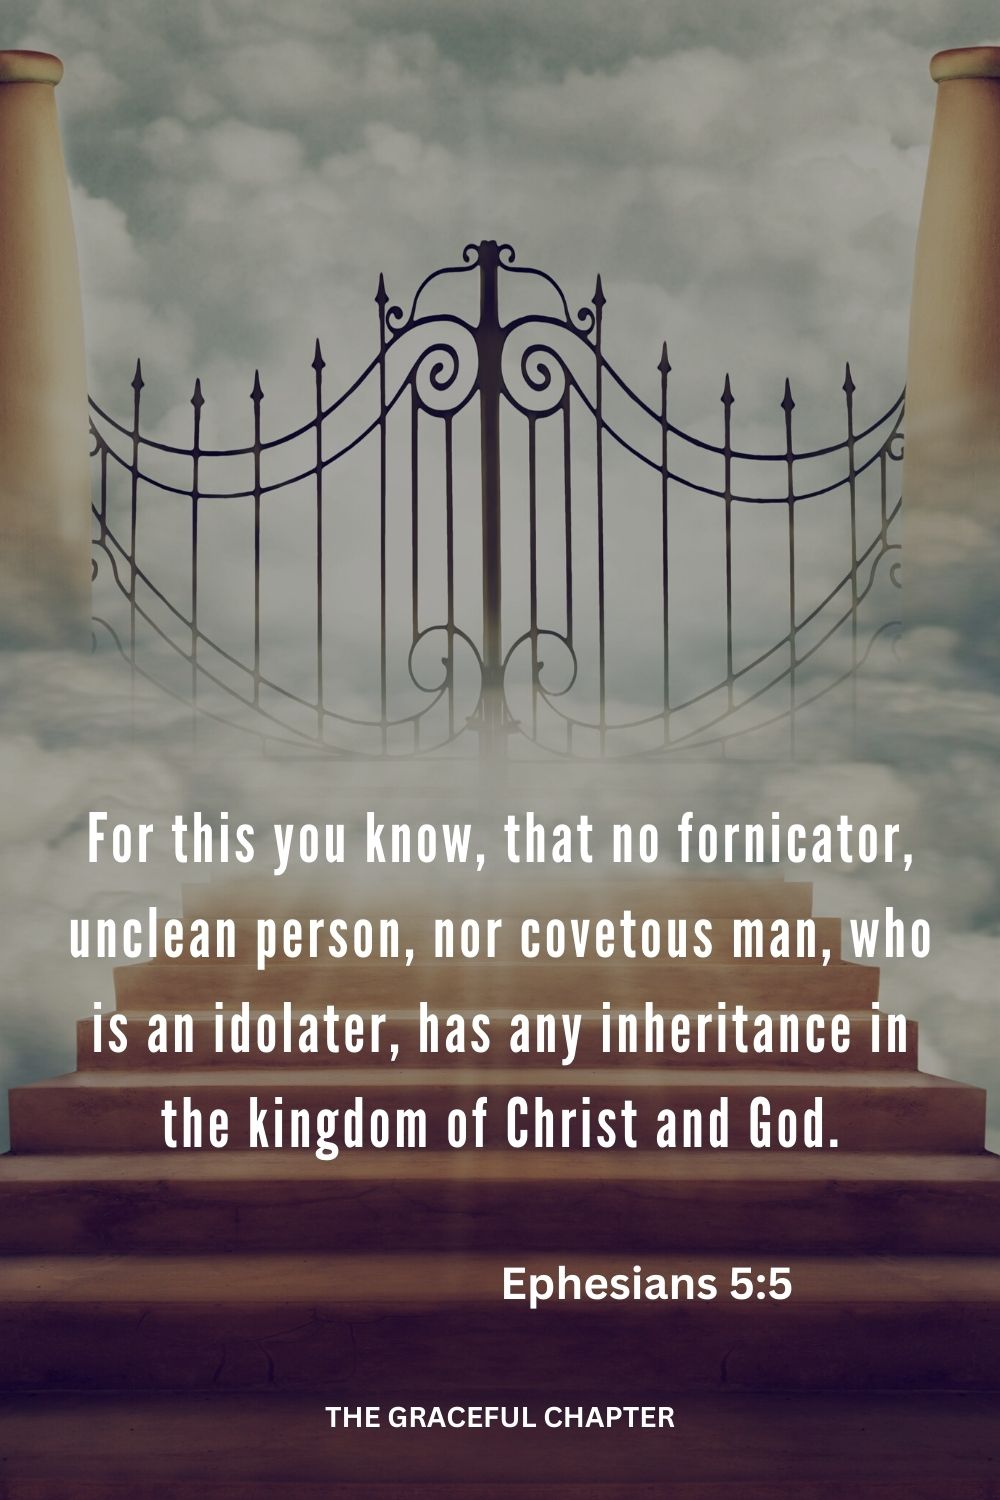 For this you know, that no fornicator, unclean person, nor covetous man, who is an idolater, has any inheritance in the kingdom of Christ and God. Ephesians 5:5